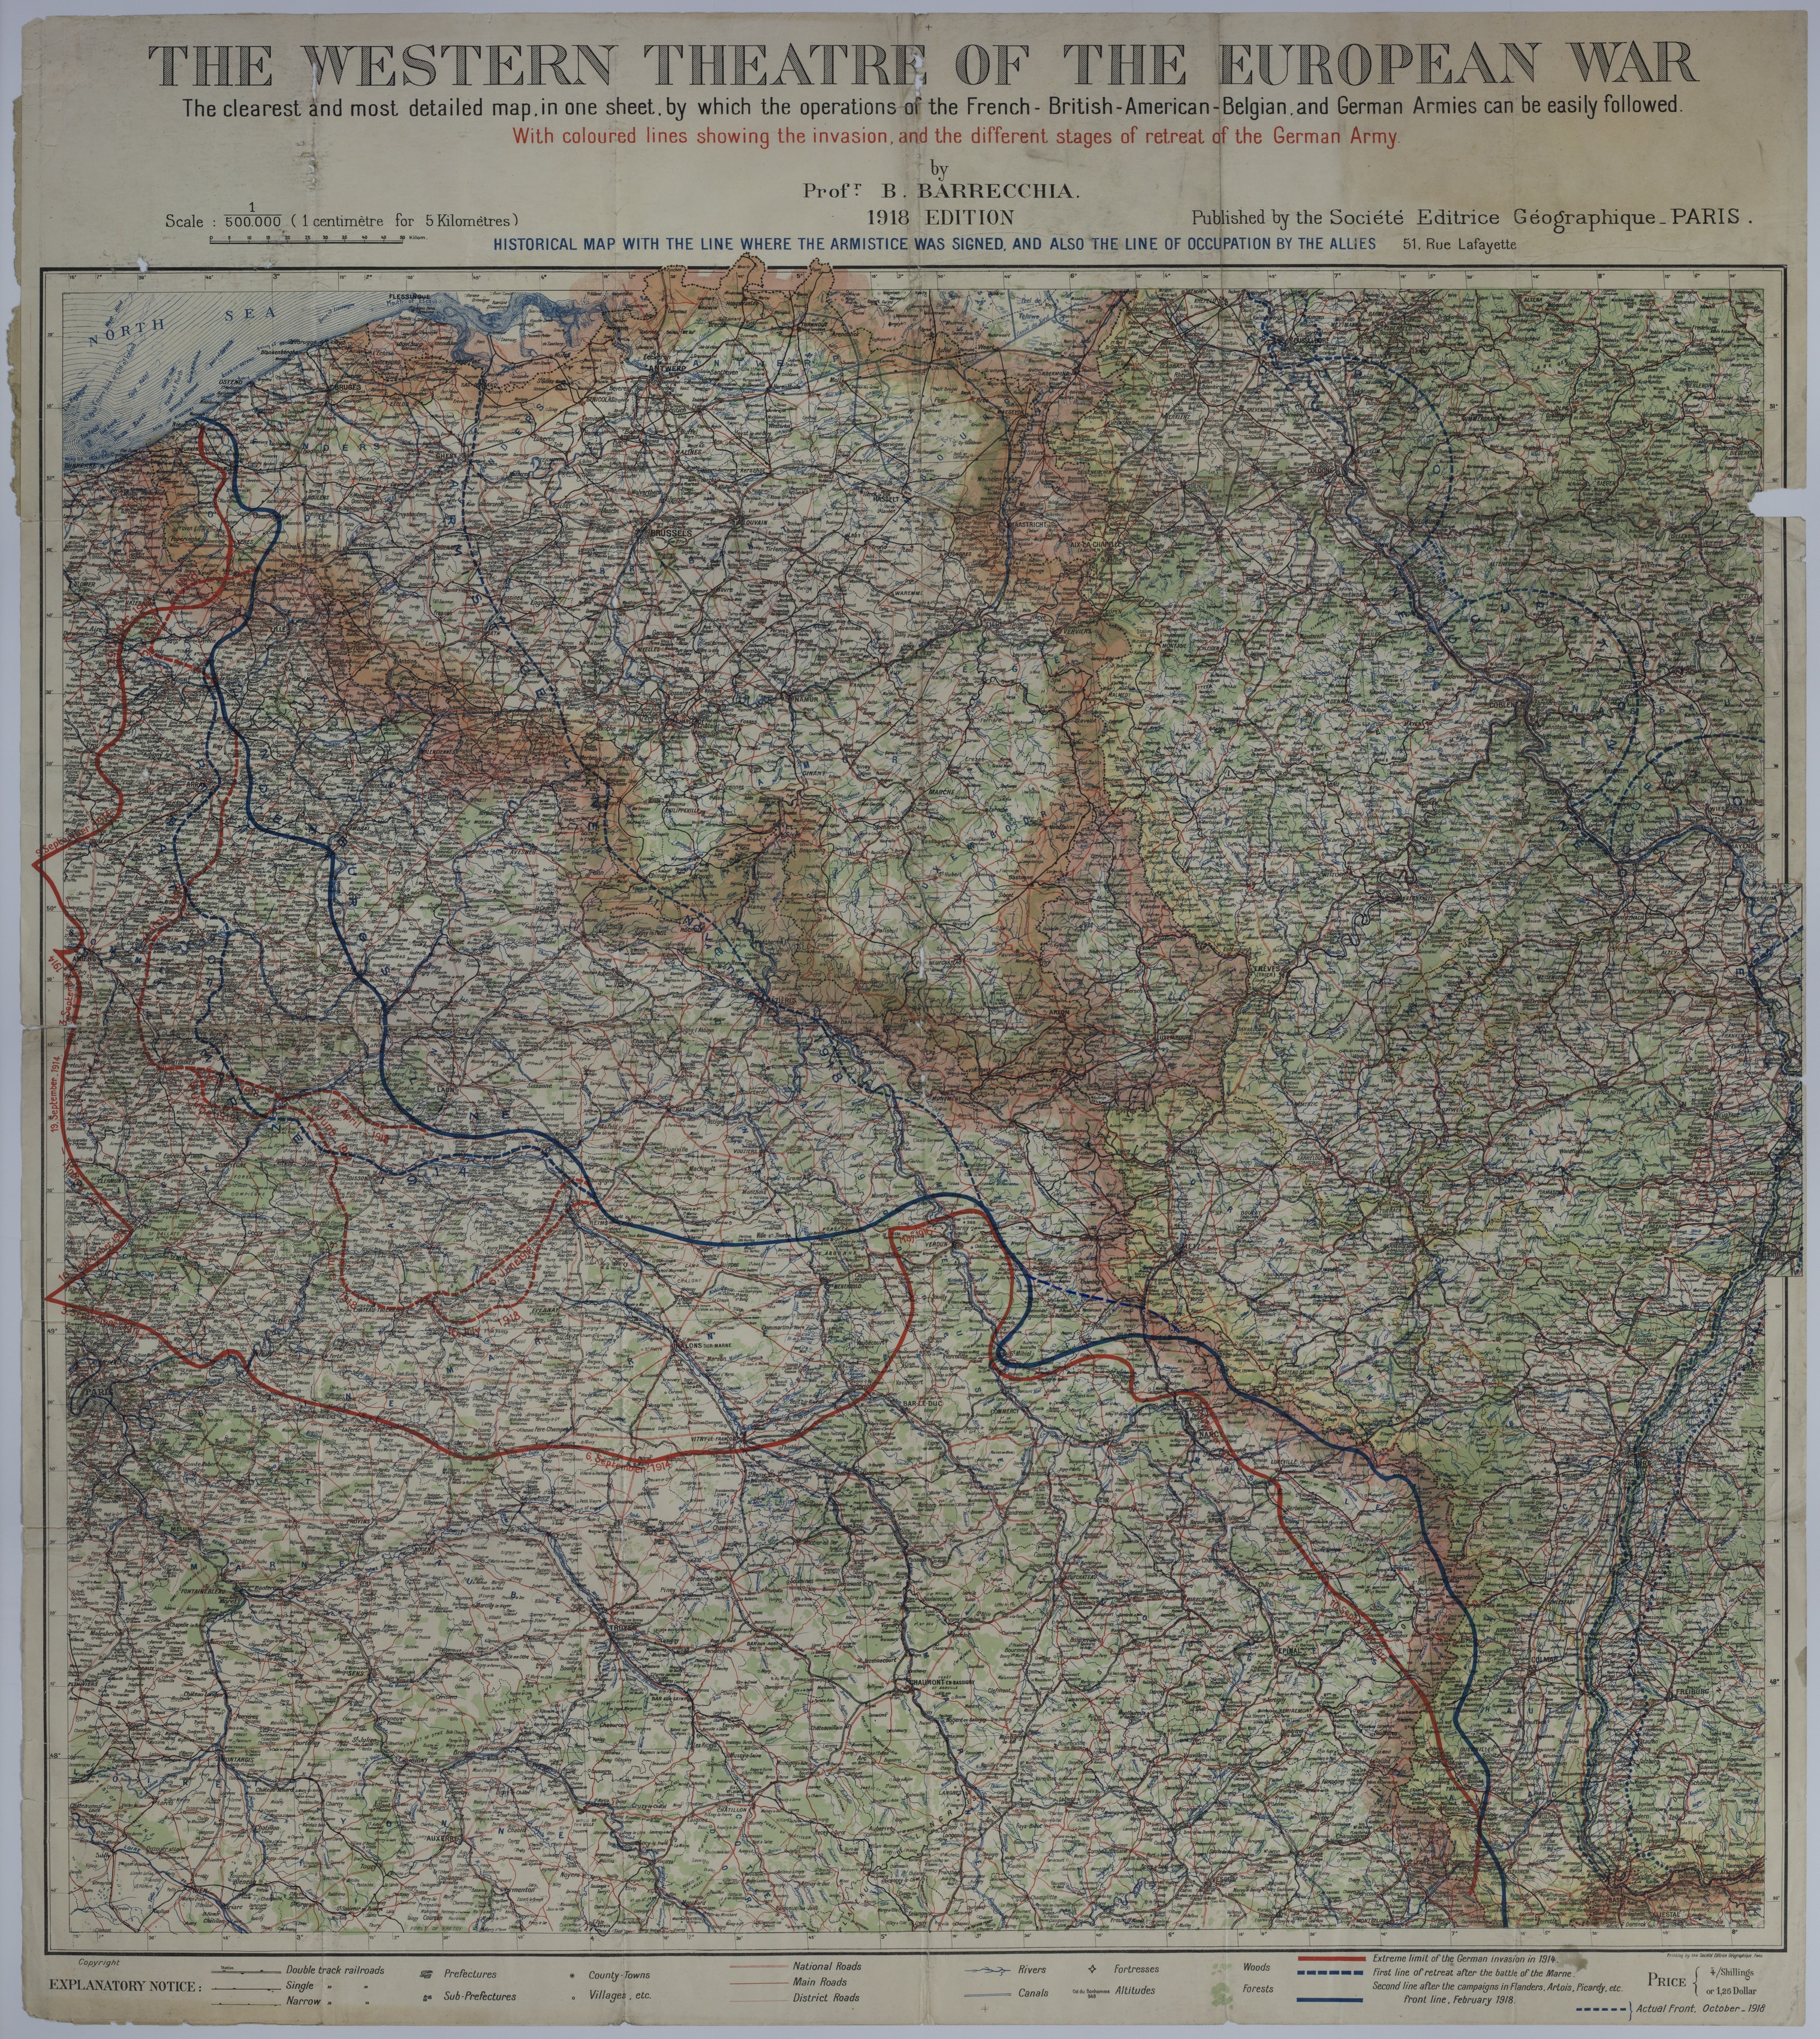 Map of Front Line Movement and Areas of Allied Occupation